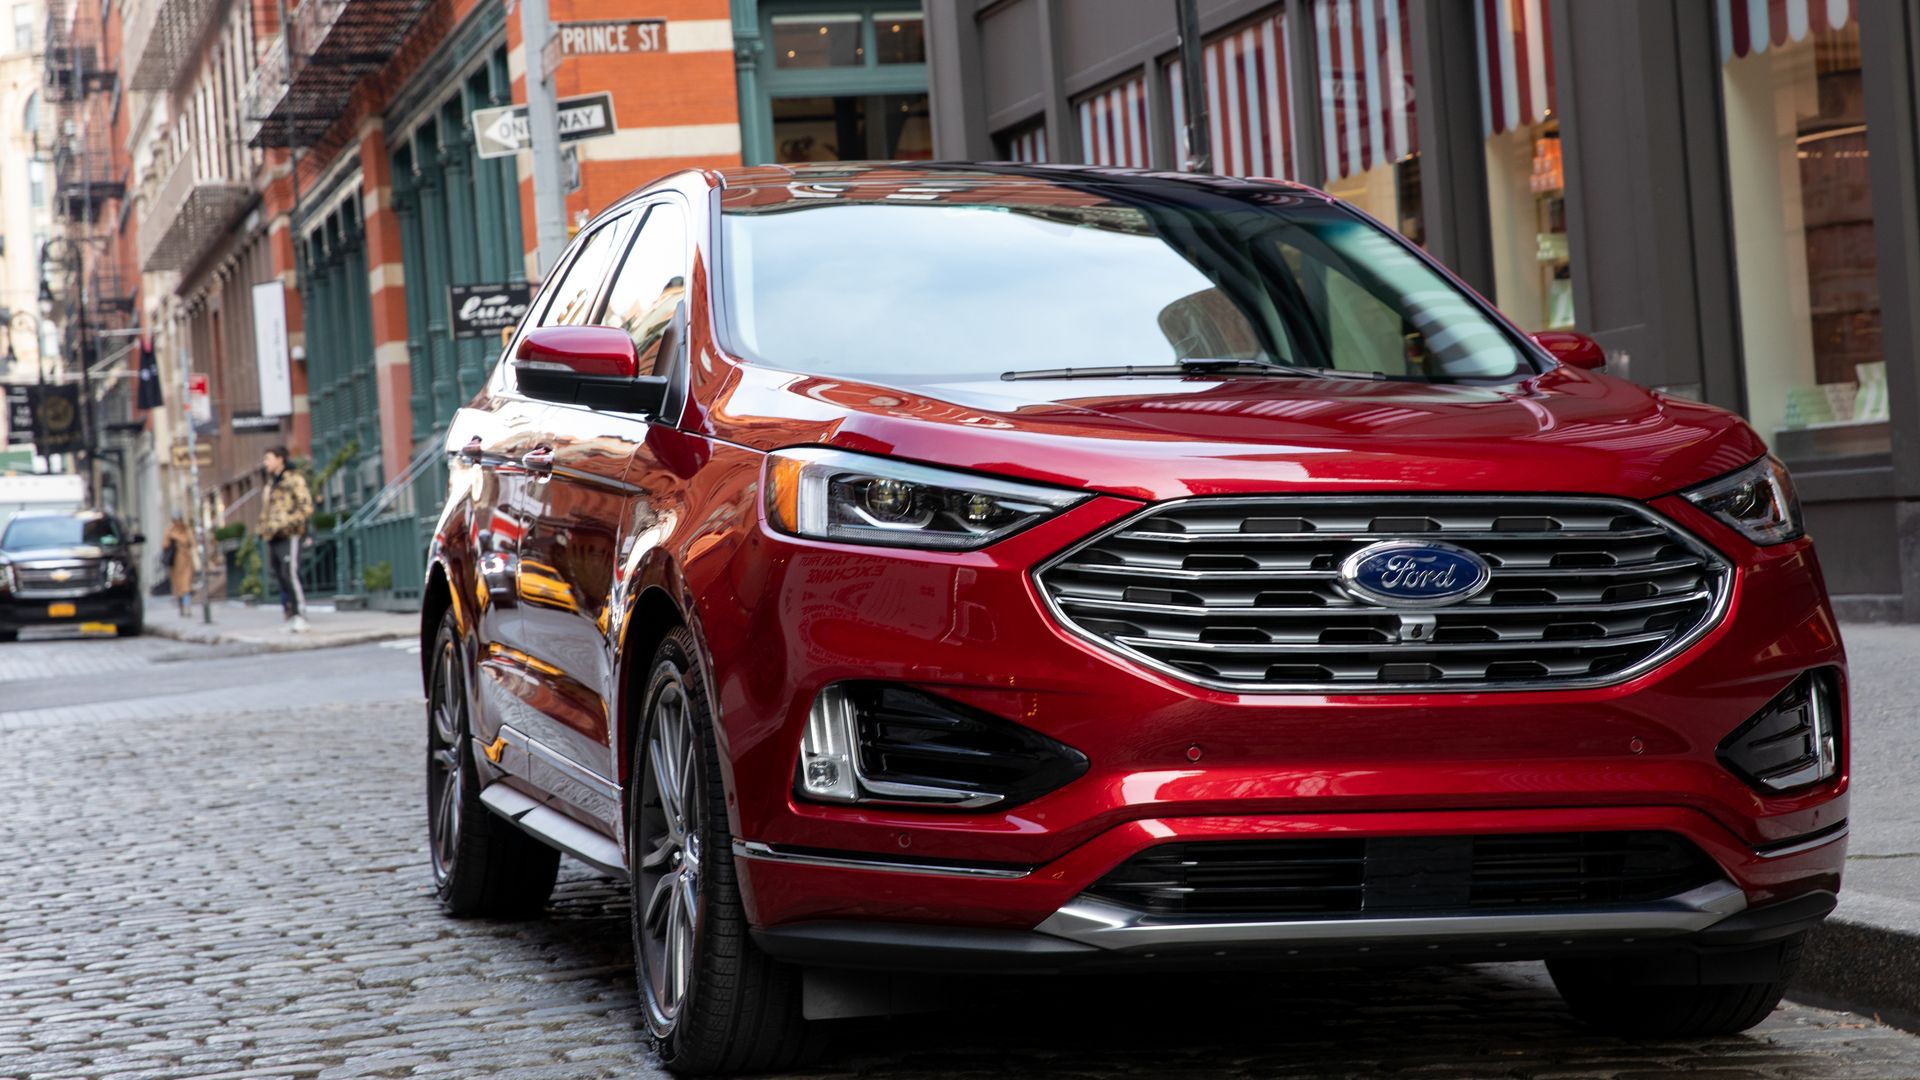 Image of 2019 Ford Edge crossover utility on a city street